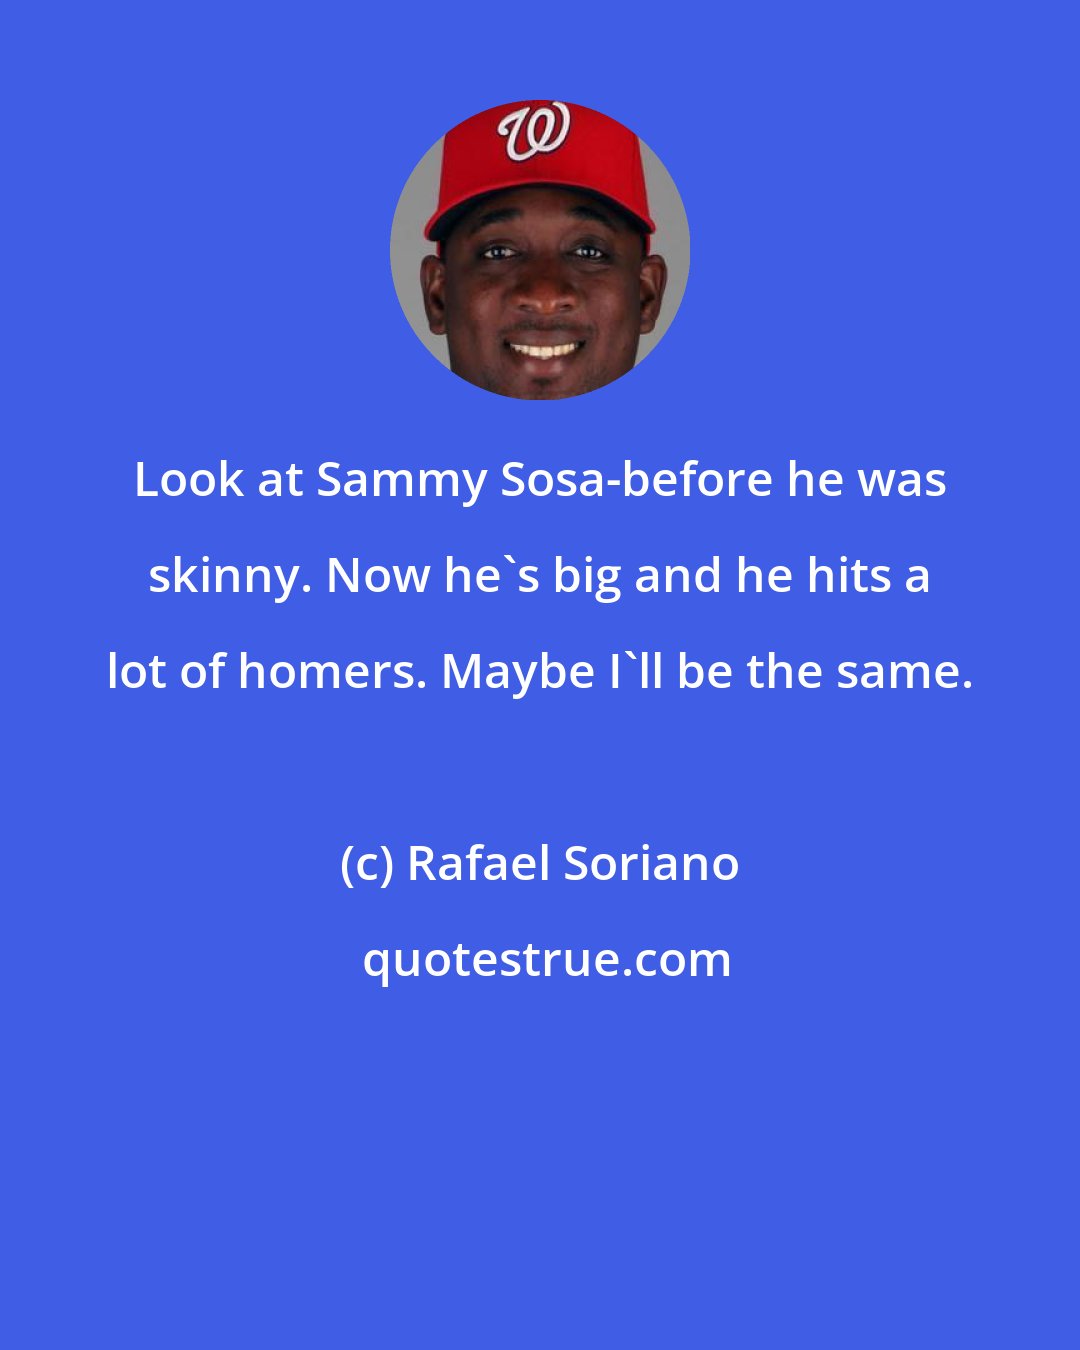 Rafael Soriano: Look at Sammy Sosa-before he was skinny. Now he's big and he hits a lot of homers. Maybe I'll be the same.